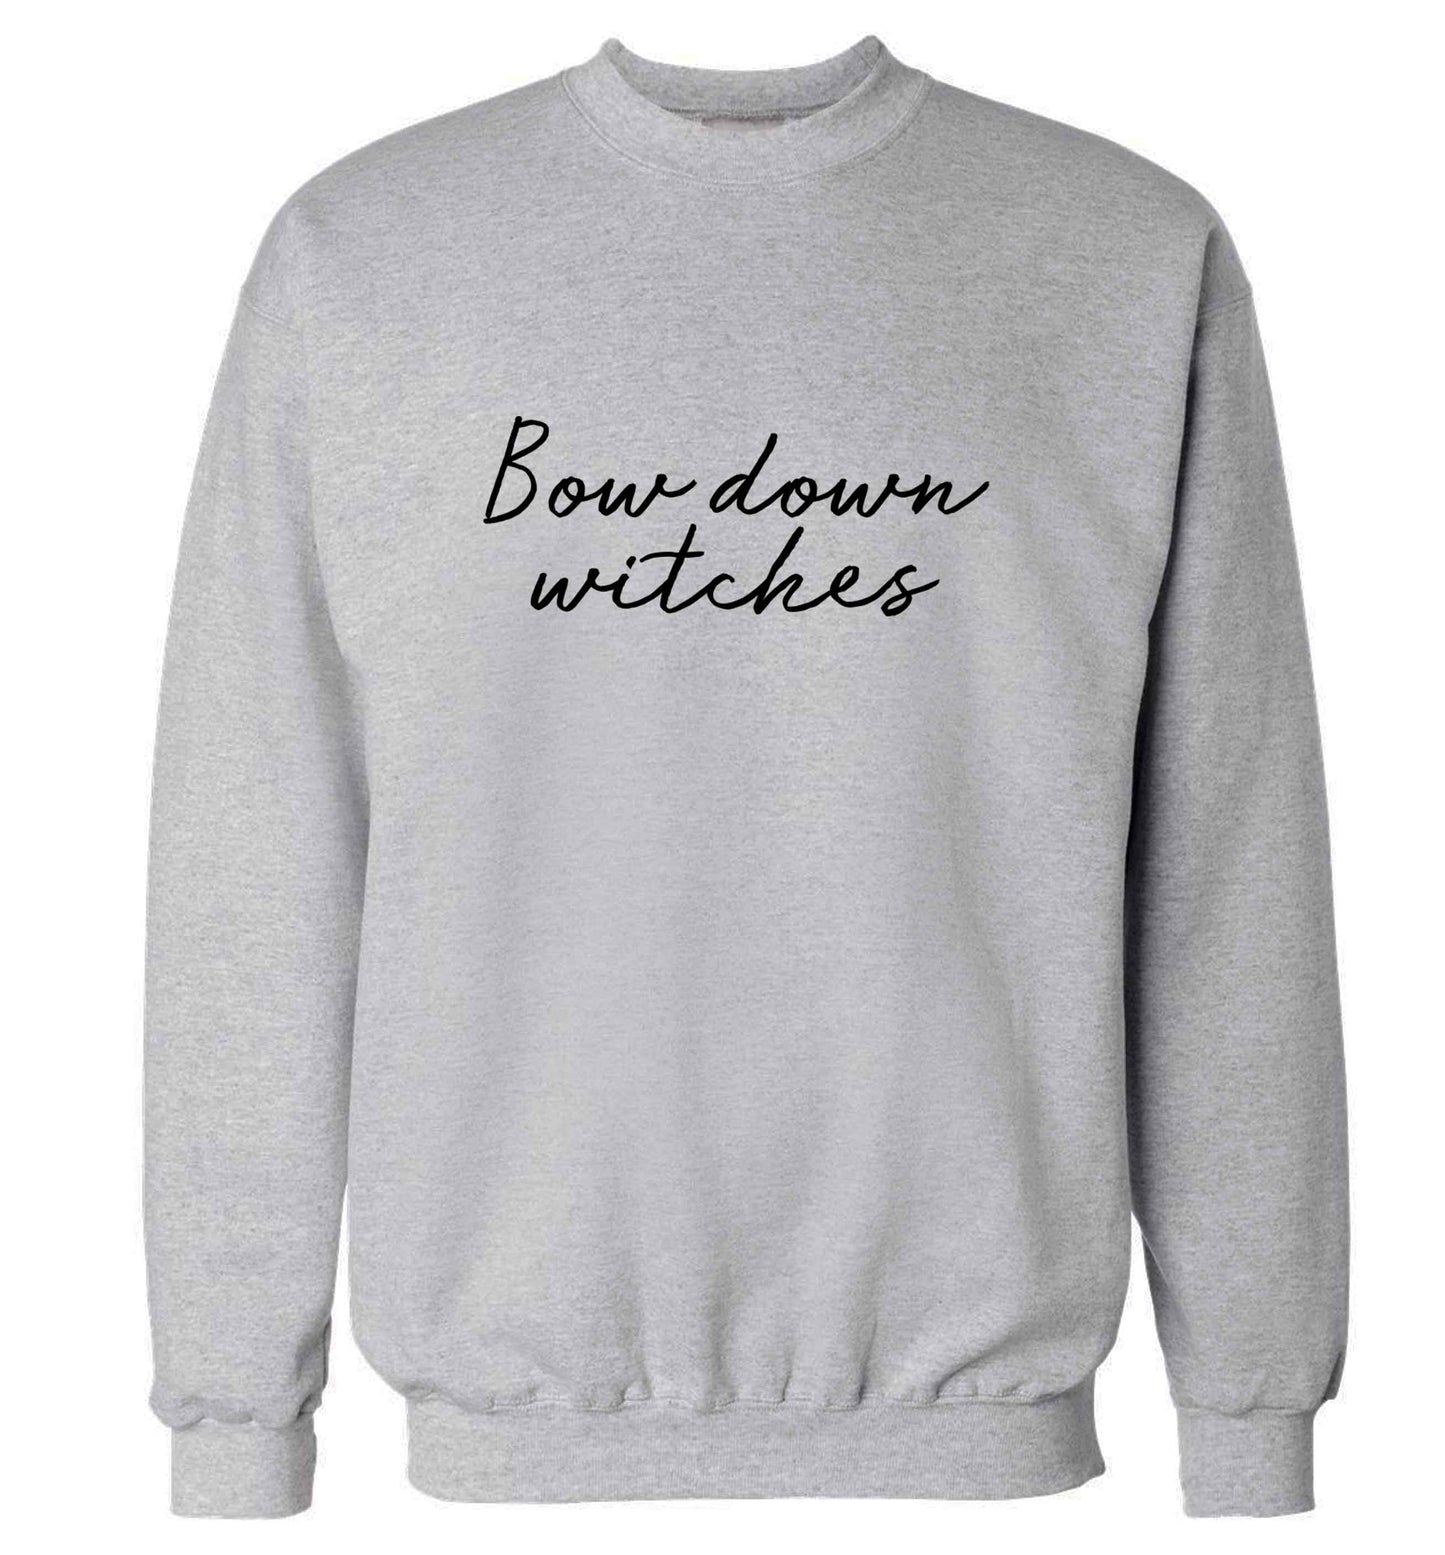 Bow down witches adult's unisex grey sweater 2XL